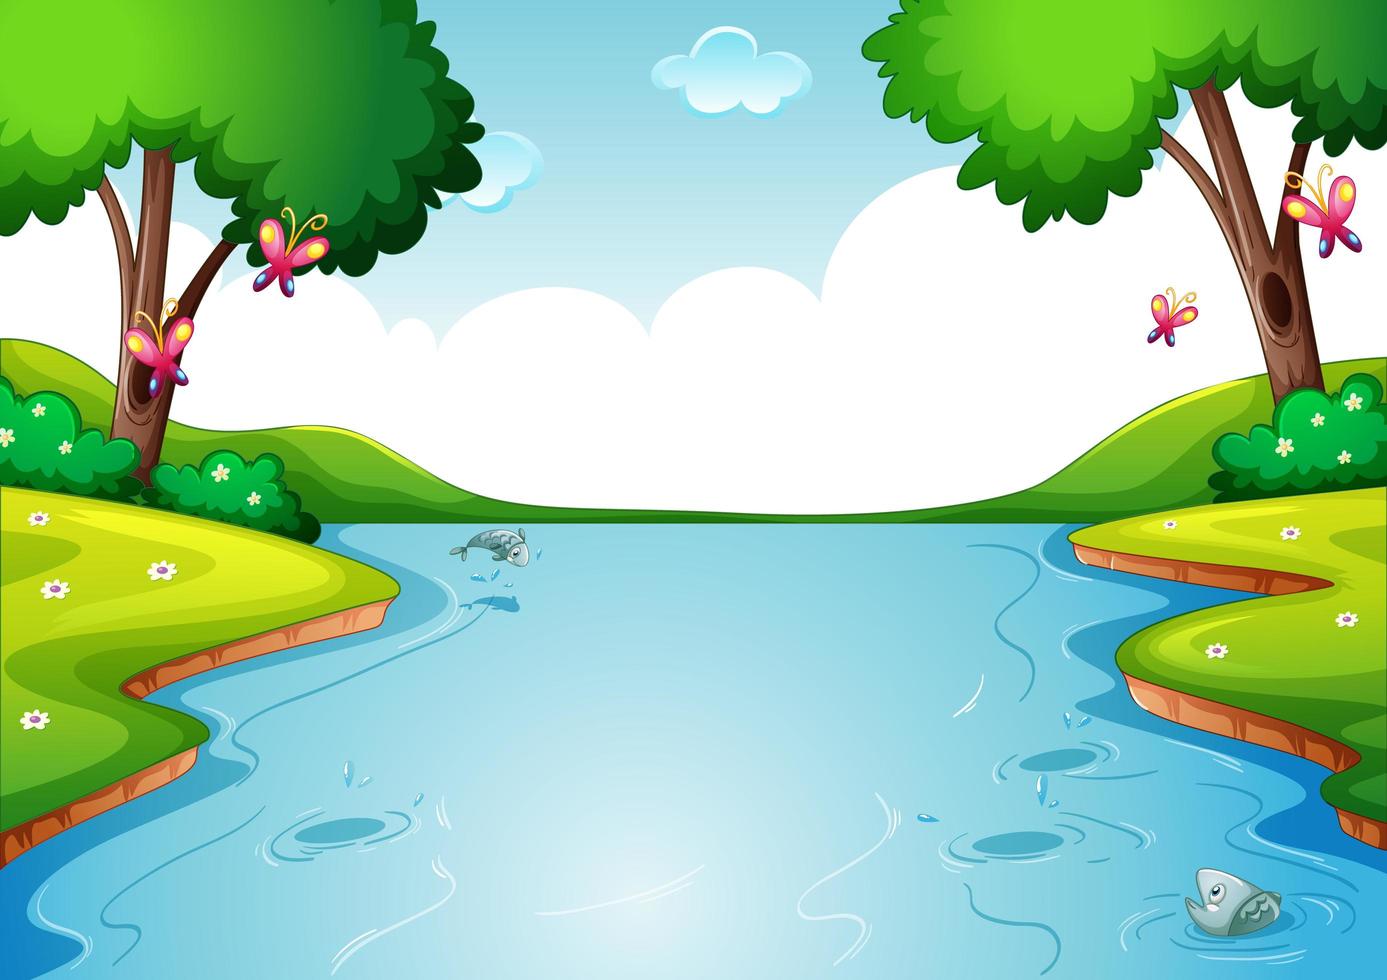 Blank river in forest nature scene background vector